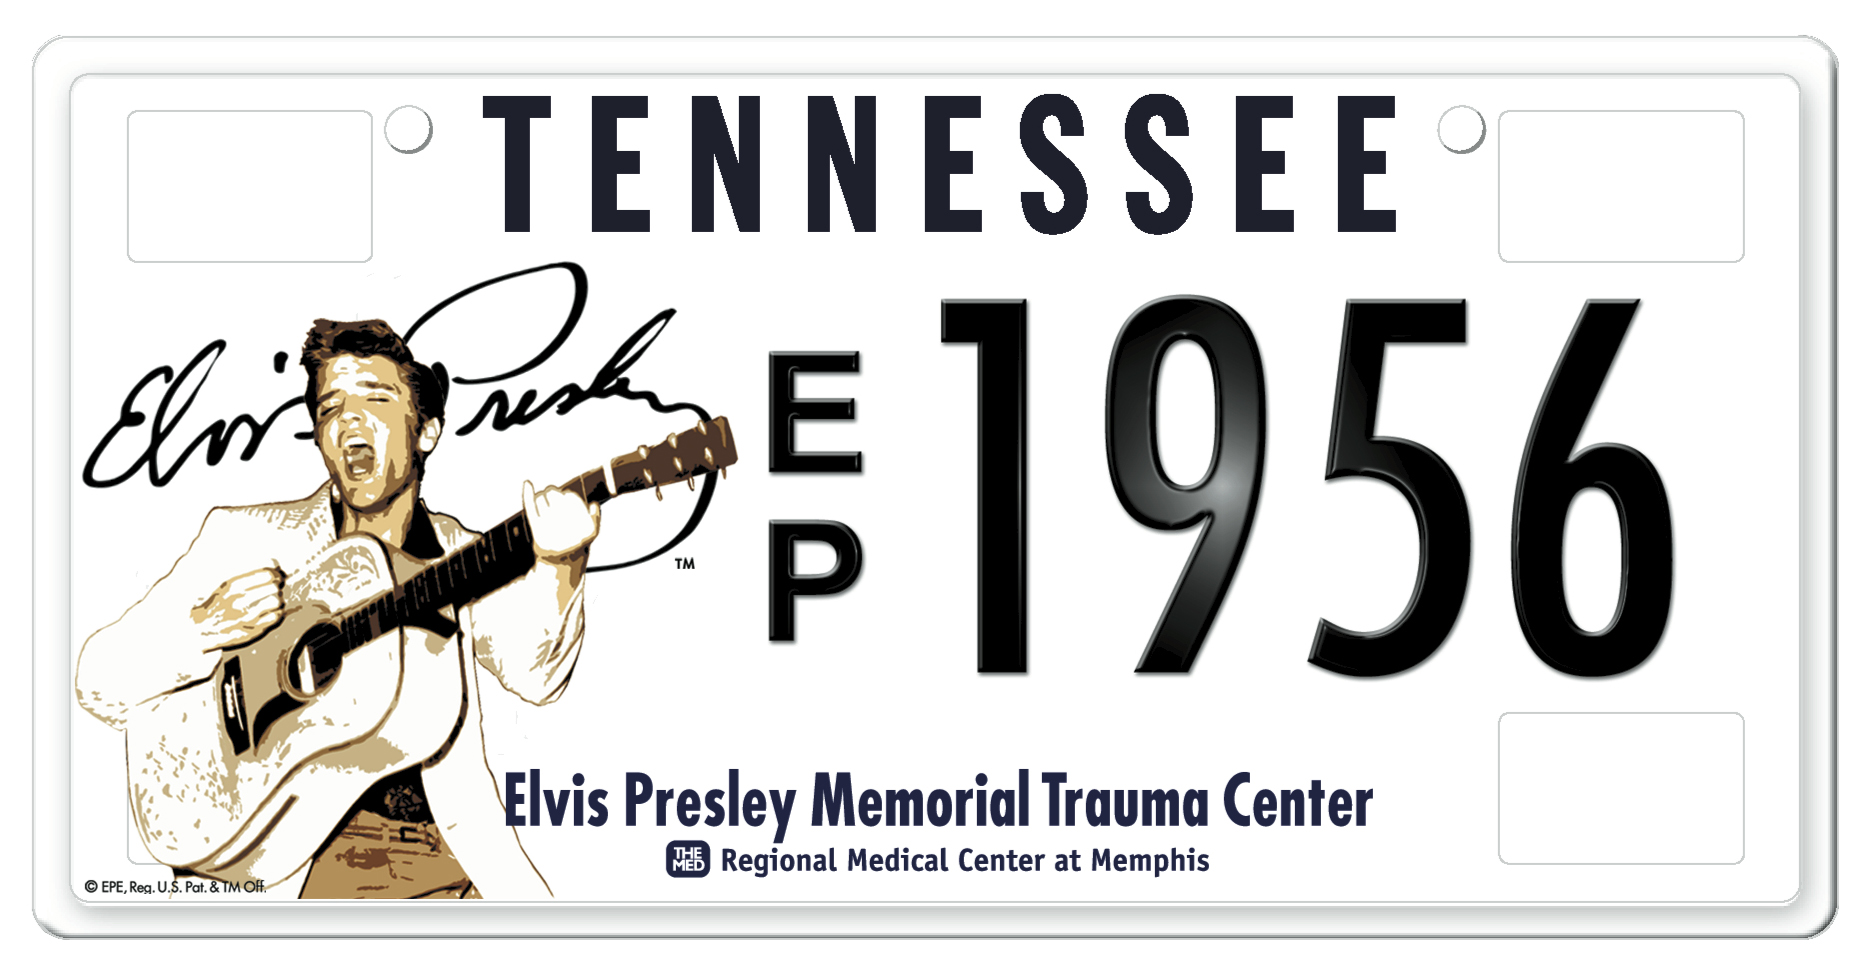  Elvis Presley Official State of Tennessee License Plate  Creative and design by Chuck Mitchell  The MED logo by the late Bill Womack     This official State of Tennessee Elvis Presley License Plate is part of the Tennessee Specialty License Plate Pr